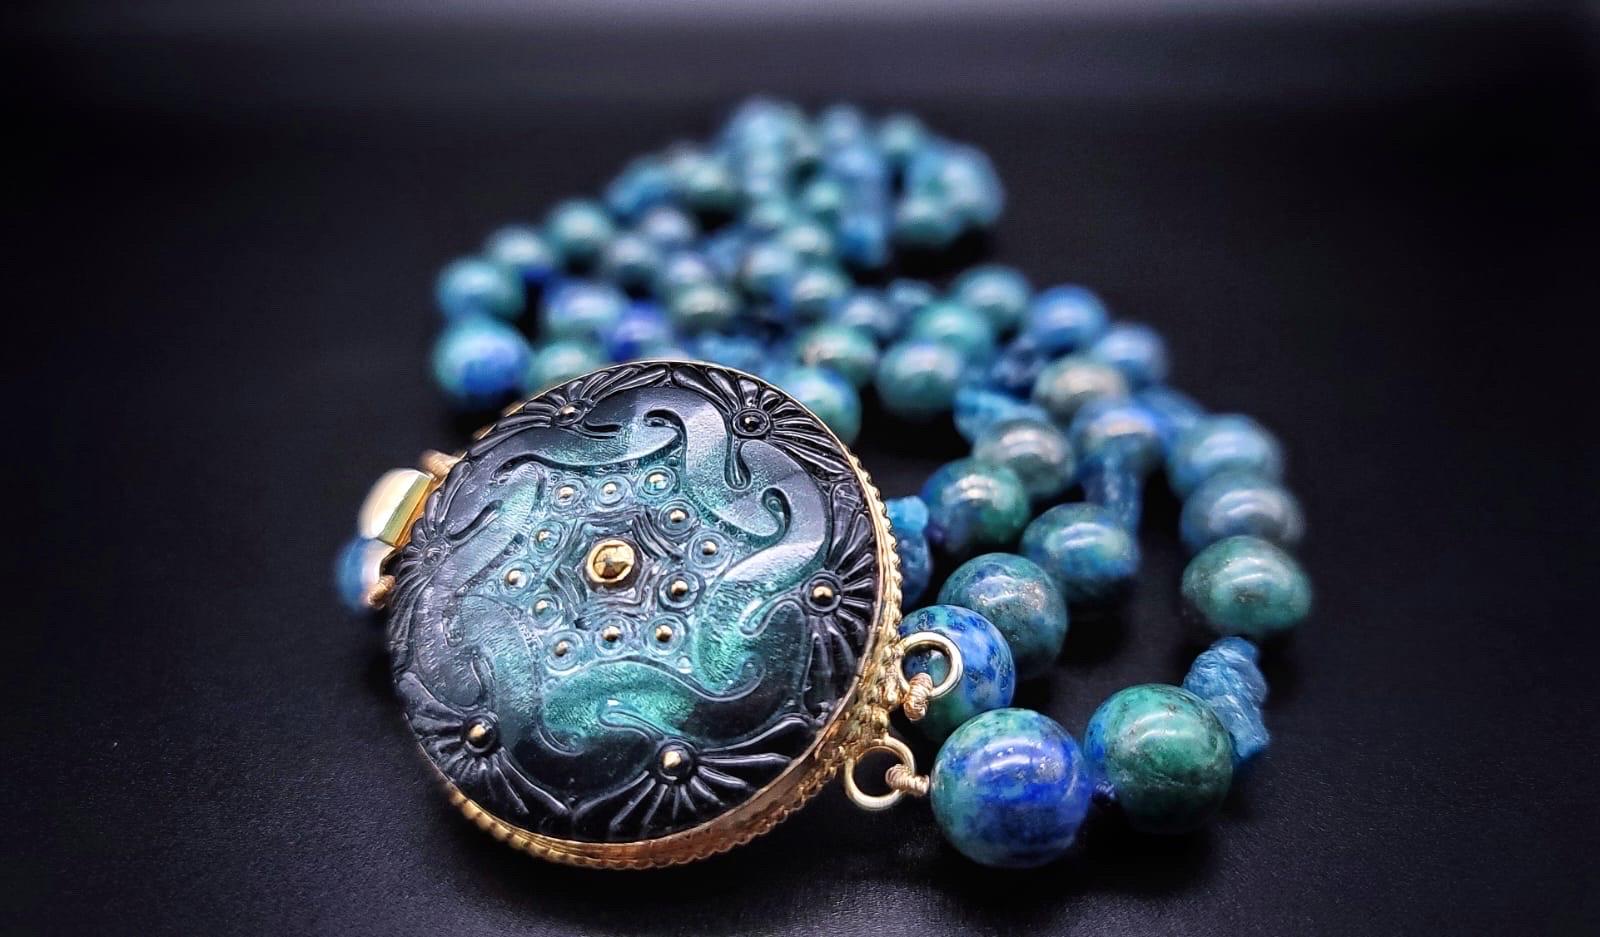 A.Jeschel Captivating Chrysocolla and Apatite necklace For Sale 8